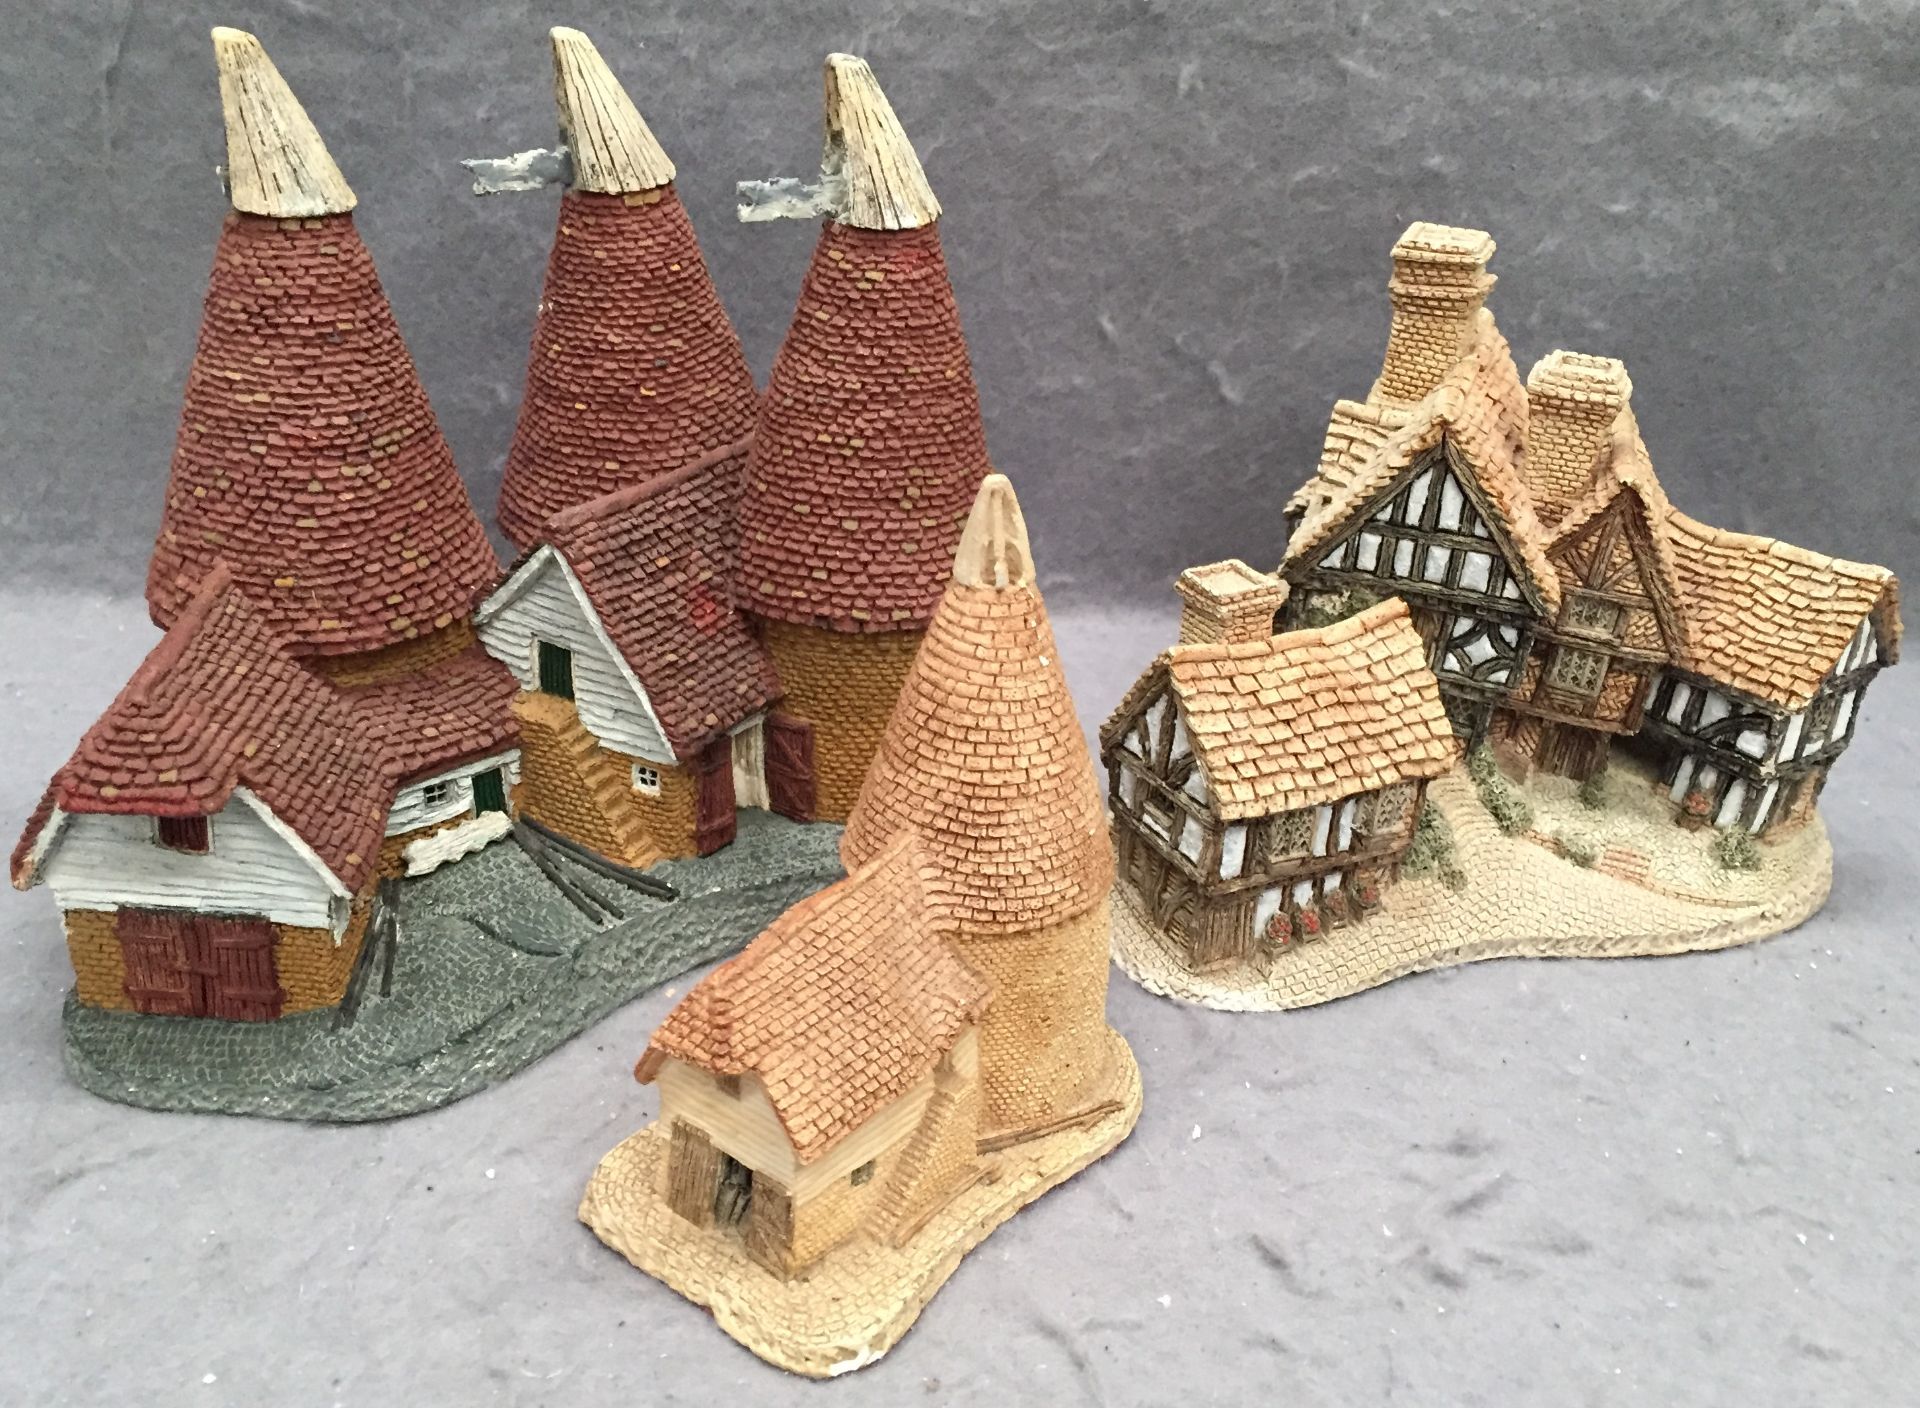 3 Cottages by David Winter - Triple Oast,